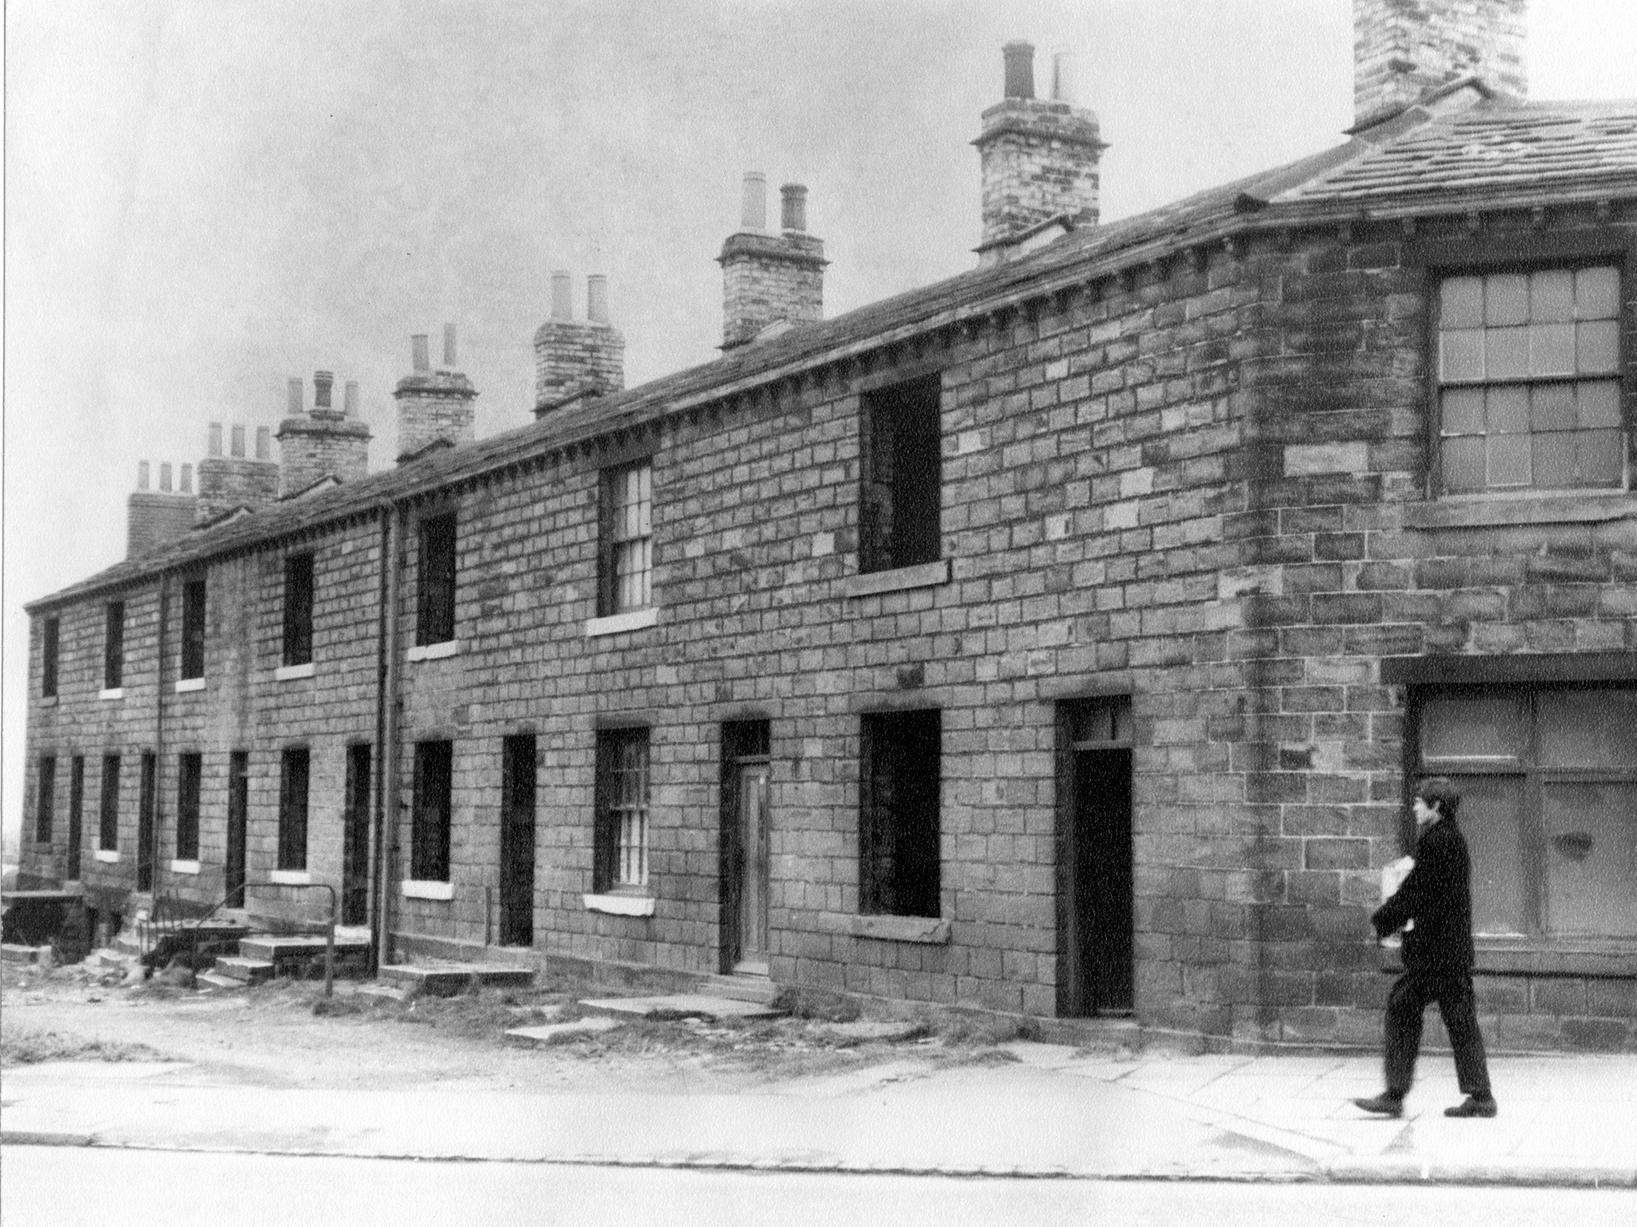 A view of derelict houses on Gelderd Road. House second from the right still has curtains to the windows and could still be occupied. A boy is walking along the road in the foreground.